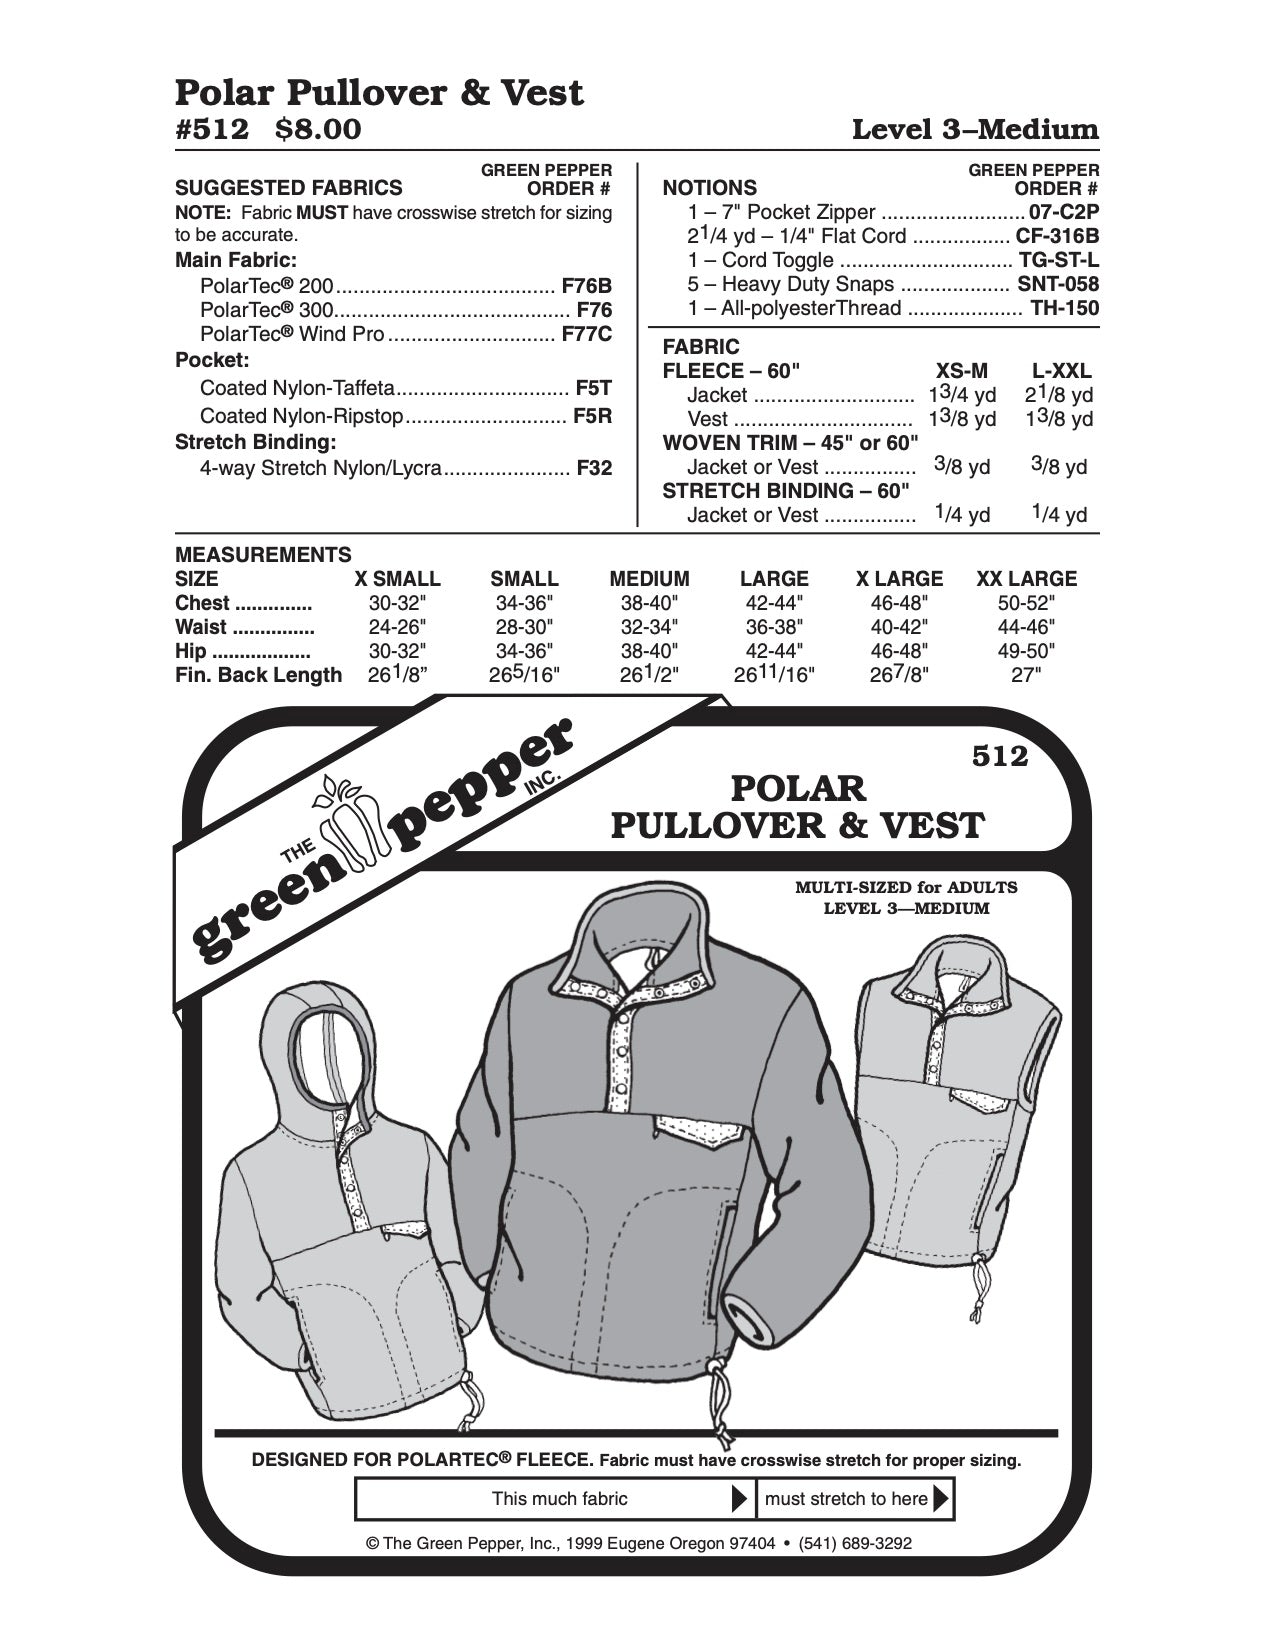 Want a Patagonia-Style Fleece Pullover? Try the Green Pepper F722